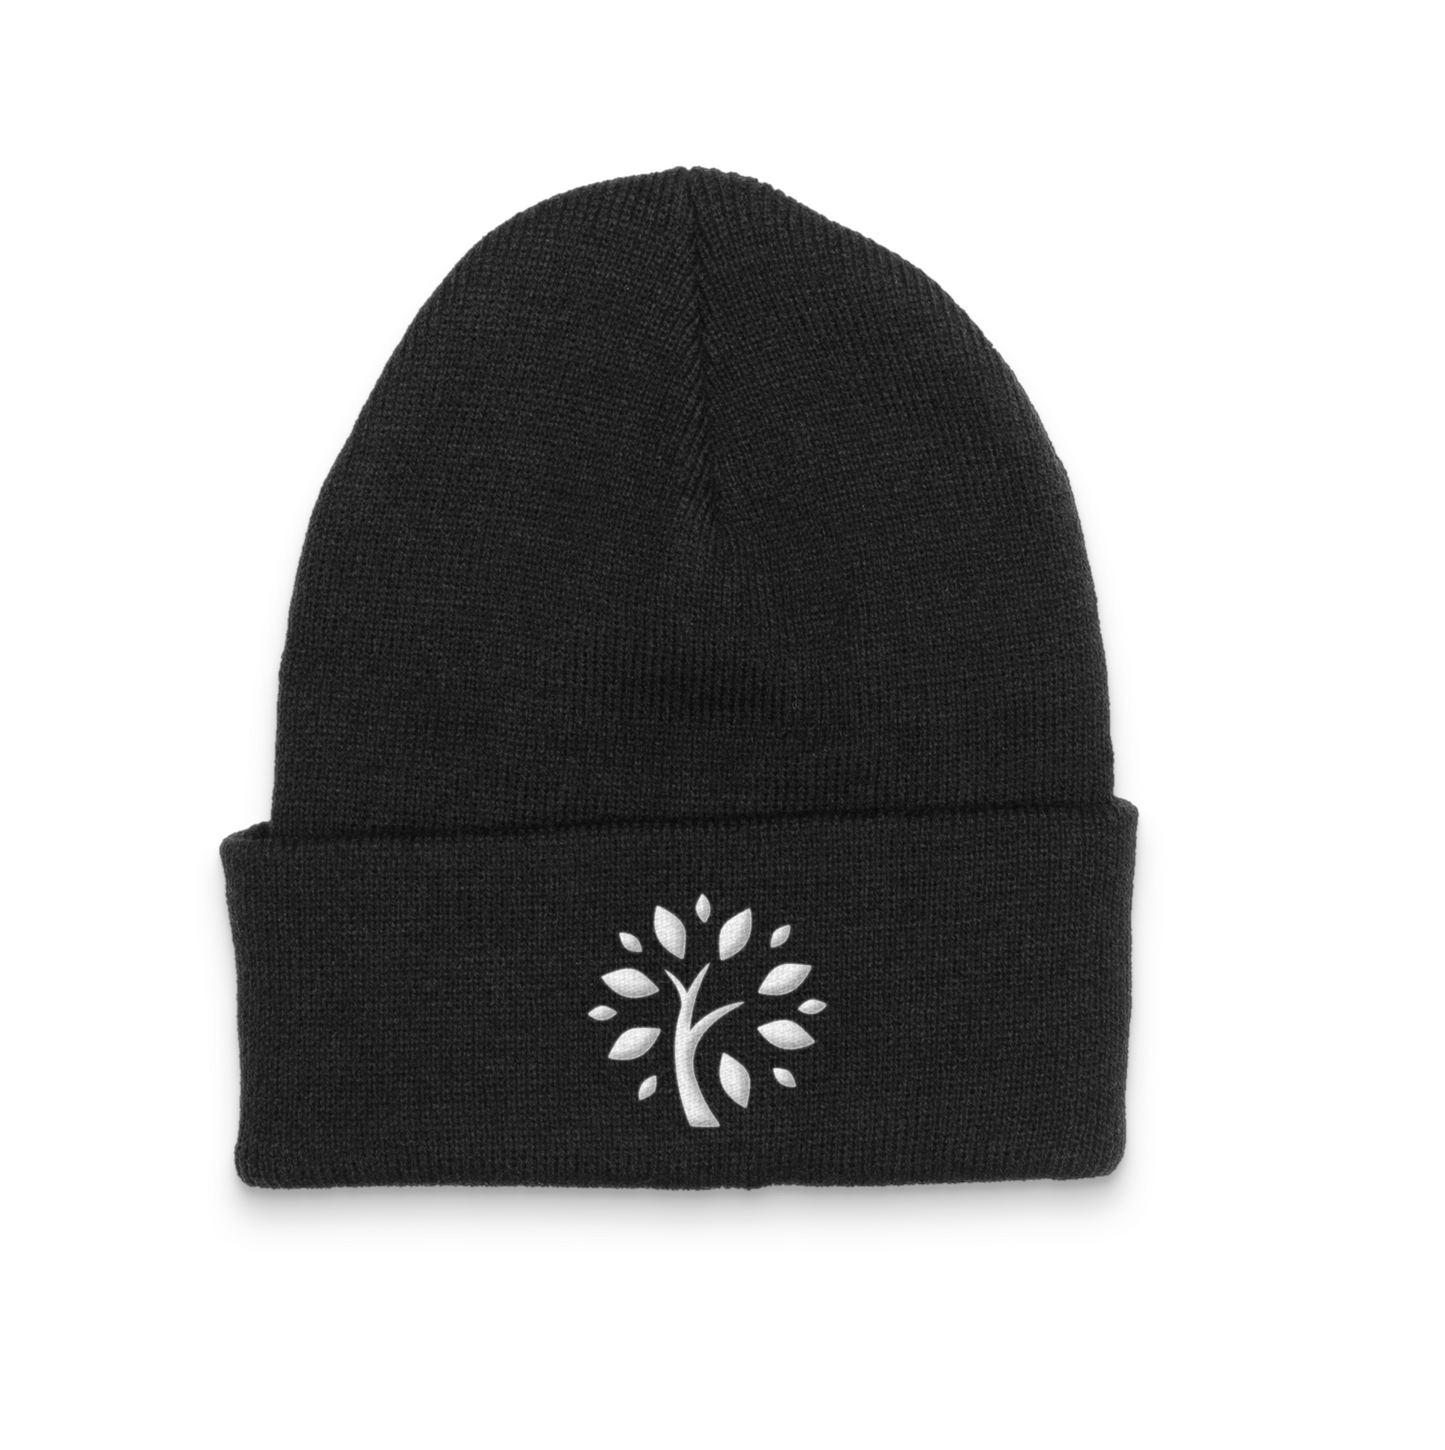 Reliable Solid 12" Cuffed Beanie